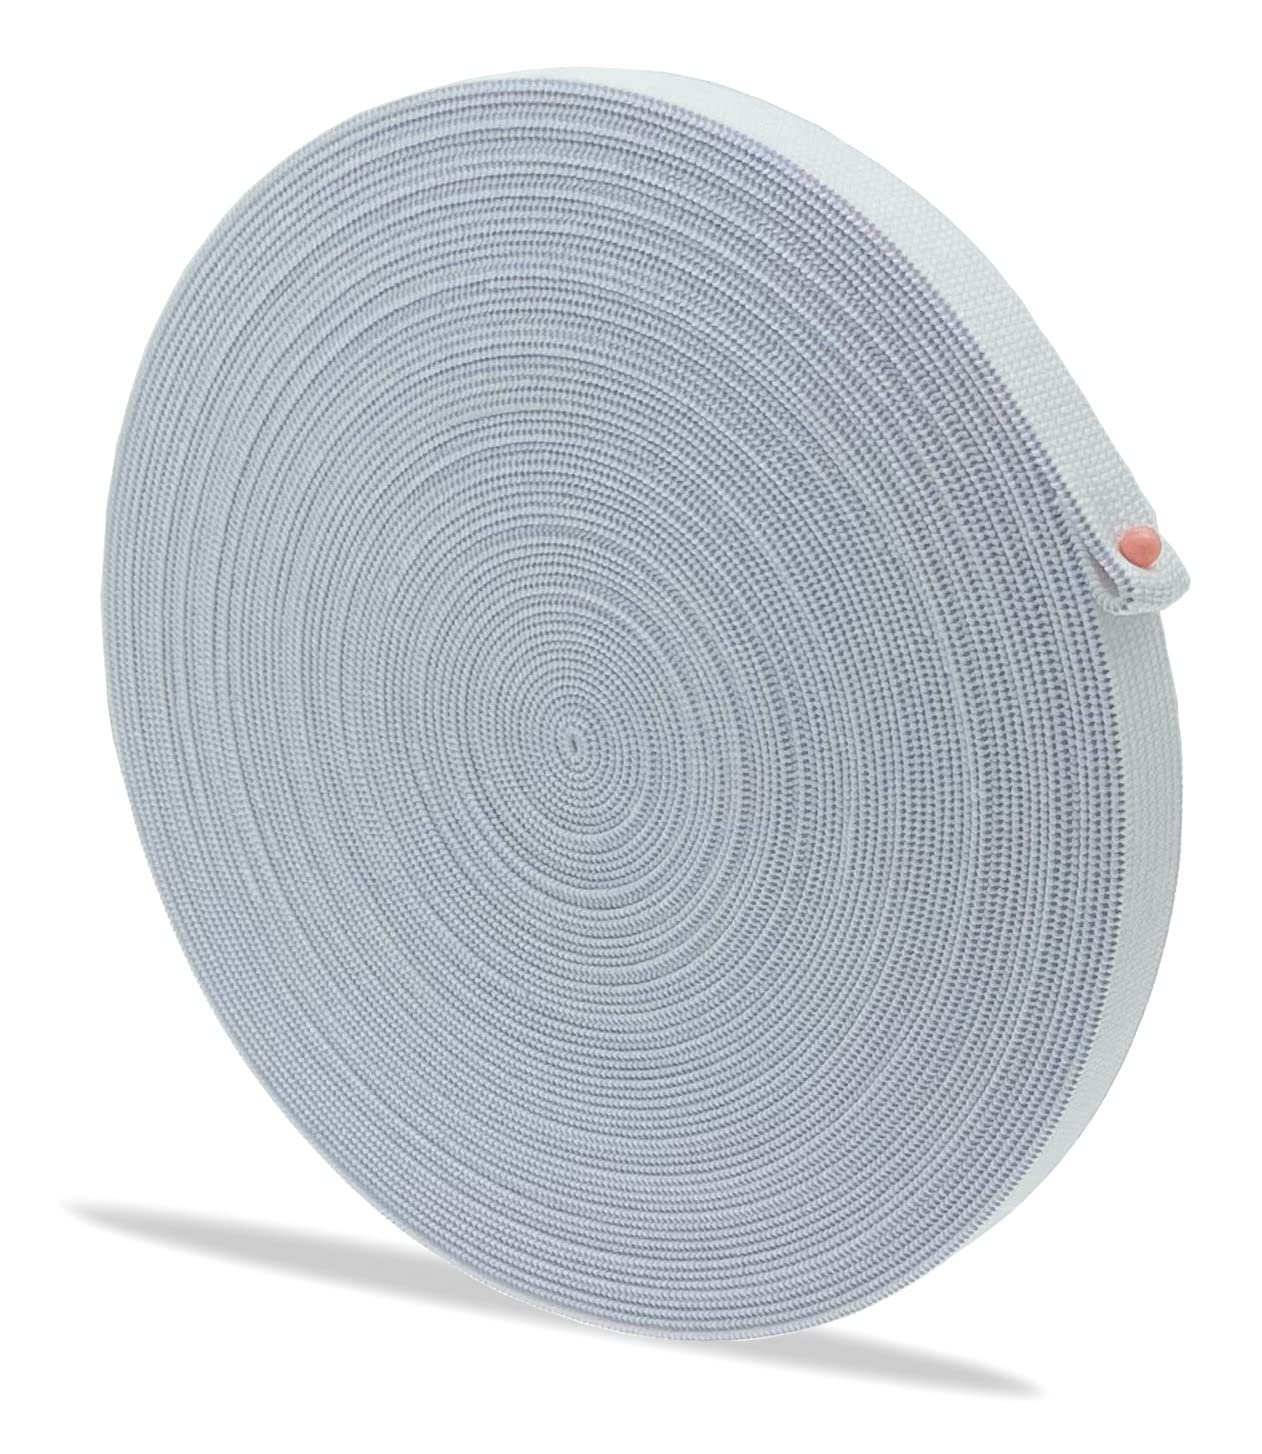 1/2 Inch x 18 Yards White Elastic Sewing Bands Knit Elastic Spool(0.5Inch)